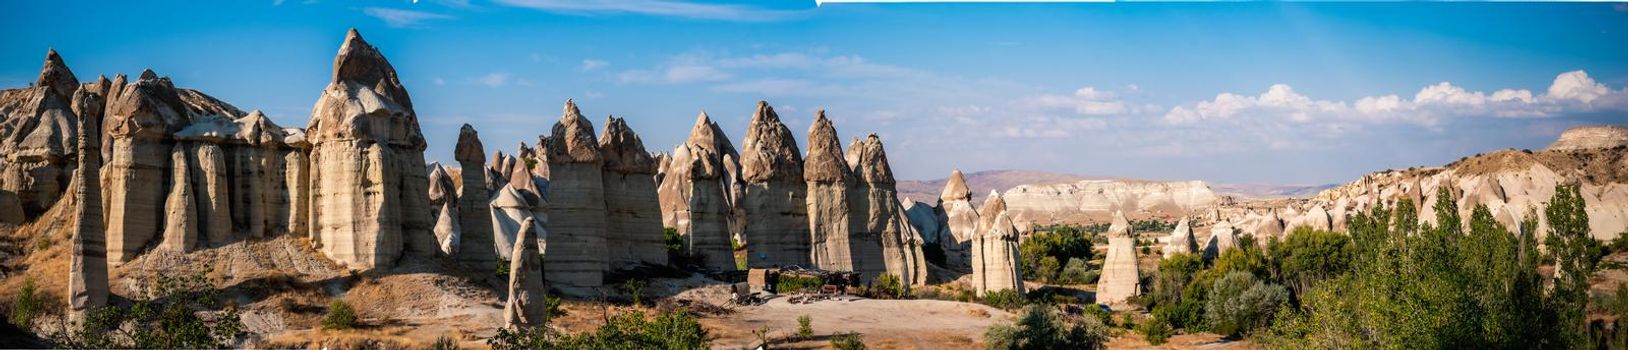 Scenic view of Love valley with chimney rocks in Cappadocia, Turkey